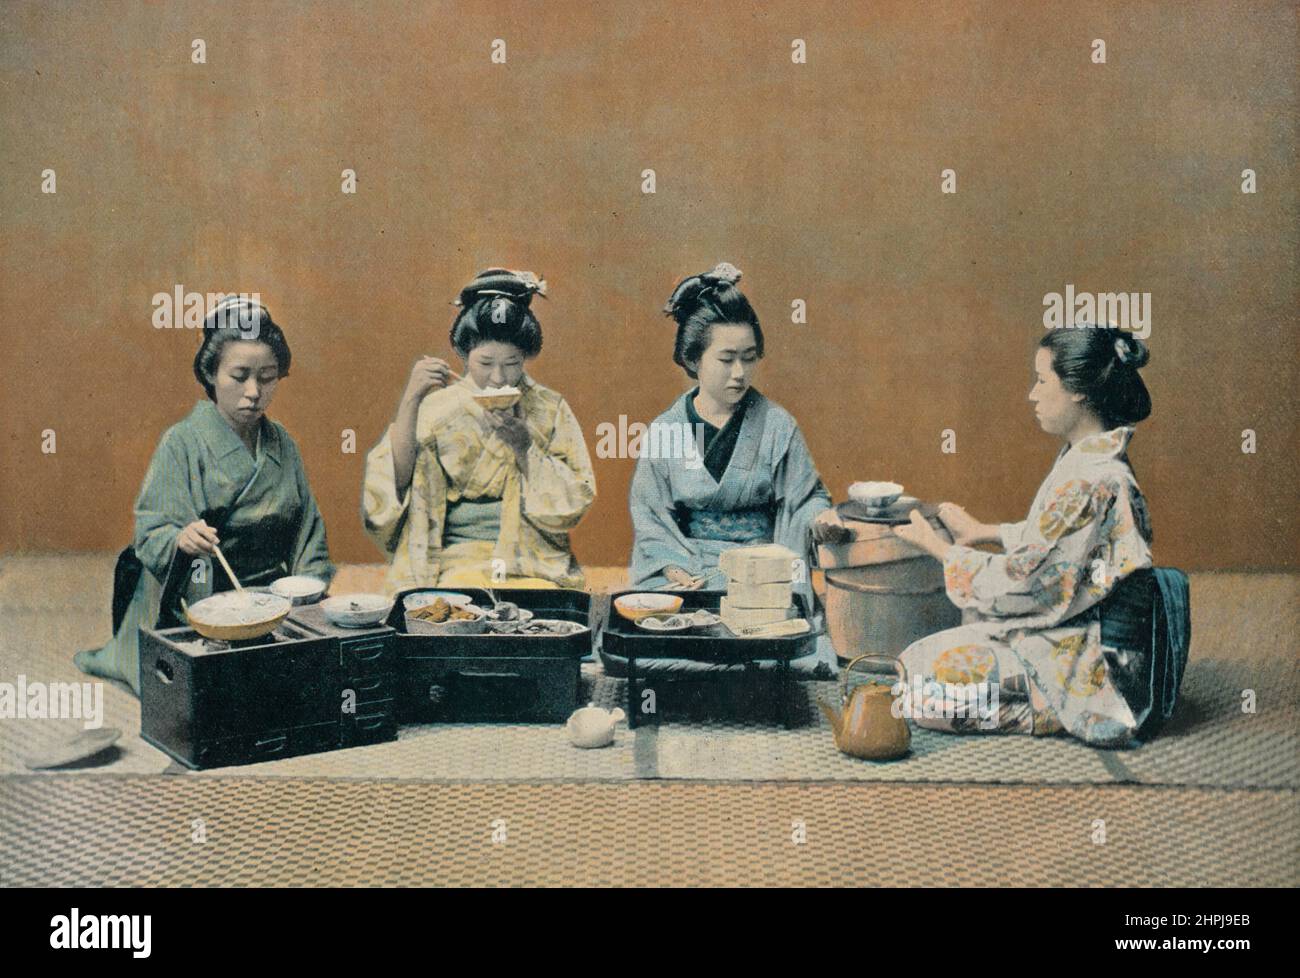 UNE SALLE A MANGER. Au Japon III 1895 - 1900  (6)  - 19 th century french colored photography print Stock Photo